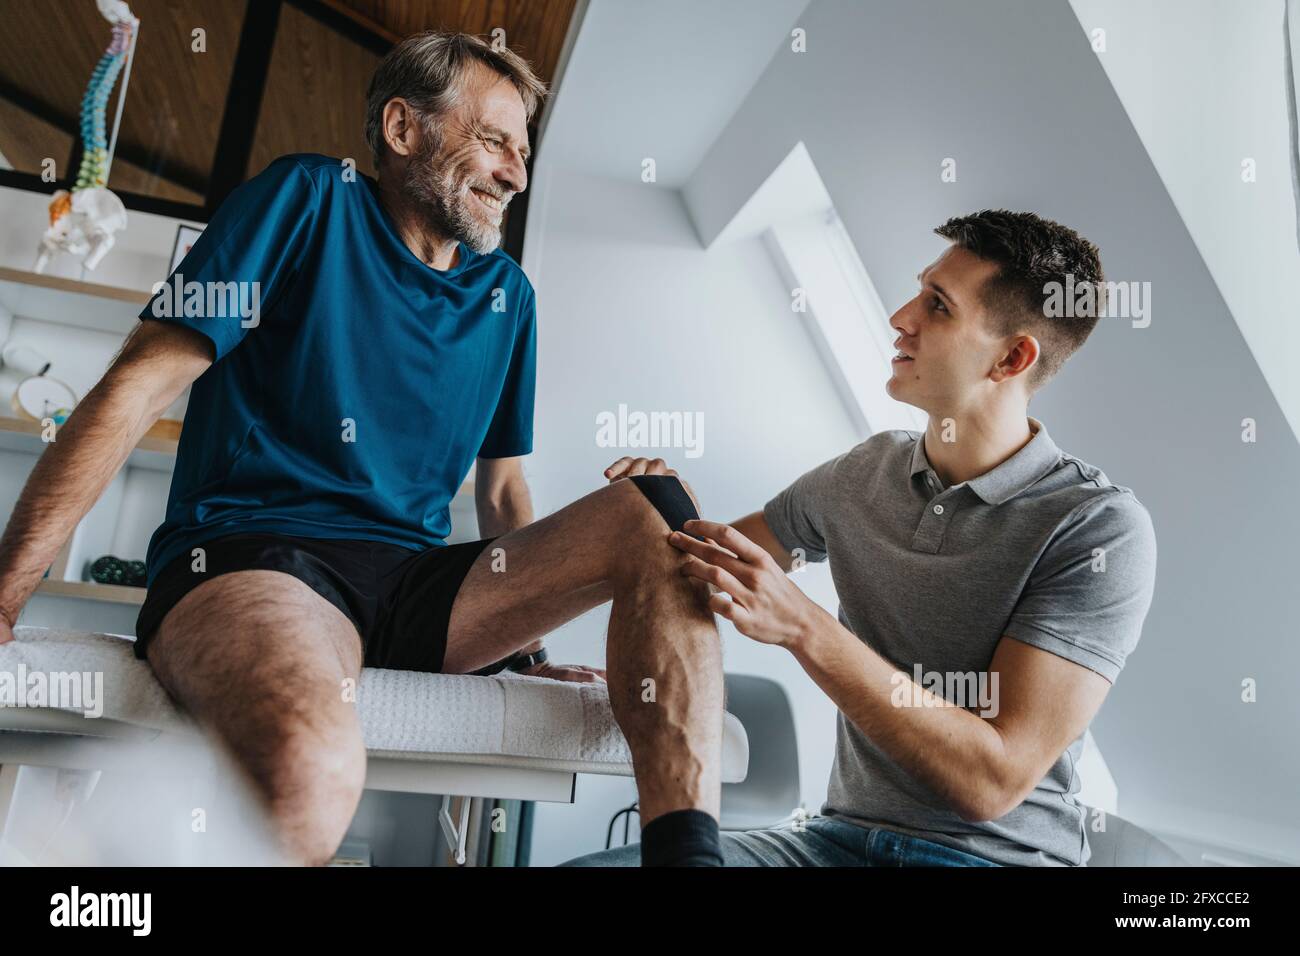 Male physical therapist sticking kinesio tape on smiling patient's knee in practice Stock Photo